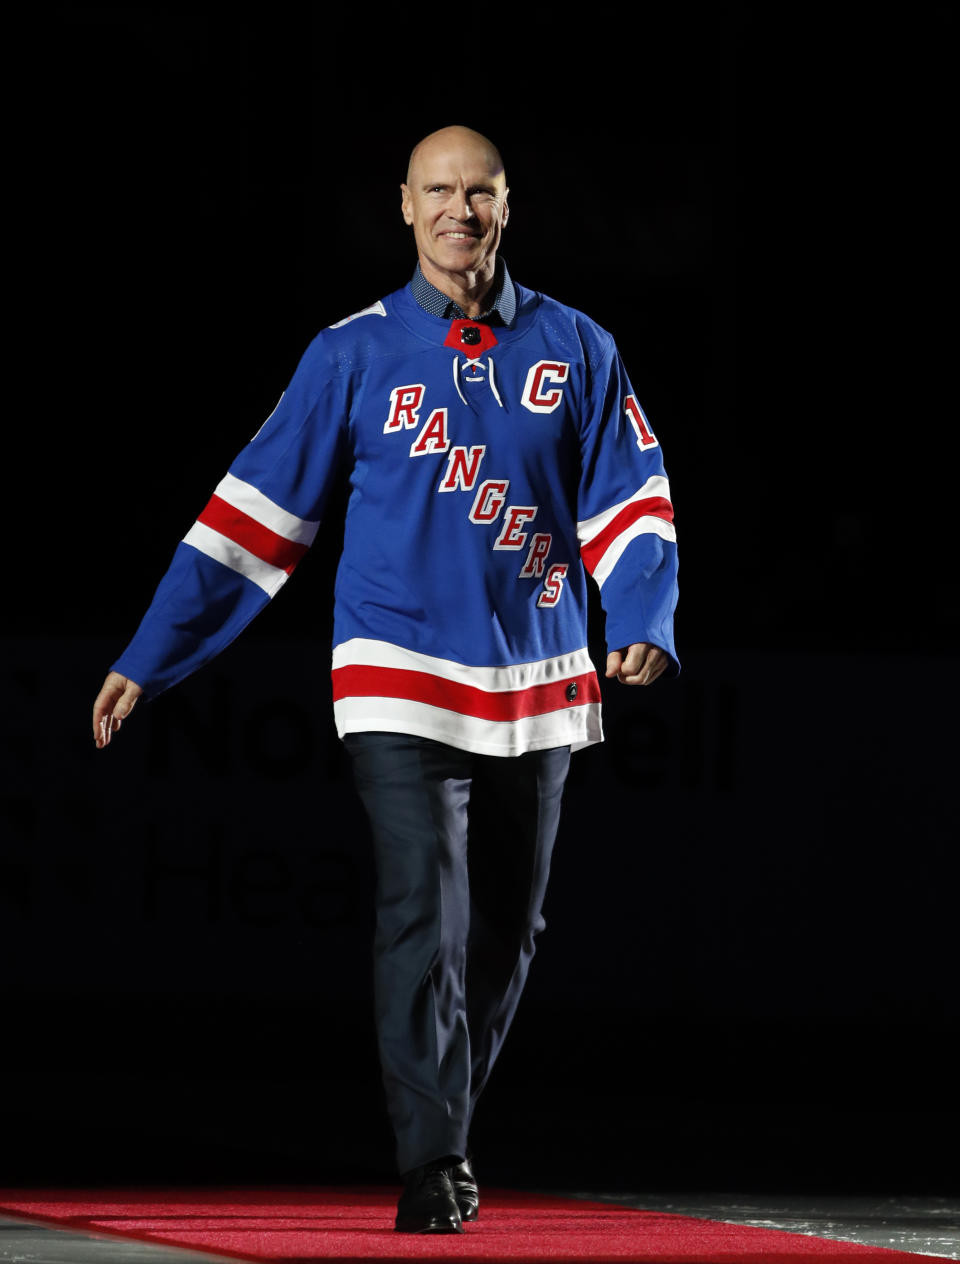 FILE - Former New York Rangers center Mark Messier appears at a ceremony retiring the number for New York Rangers Hall of Famer Jean Ratelle before an NHL hockey game in New York on Feb. 25, 2018. Messier’s memoir “No One Wins Alone” will be published in October, by Gallery Books, a Simon & Schuster imprint. (AP Photo/Kathy Willens, File)